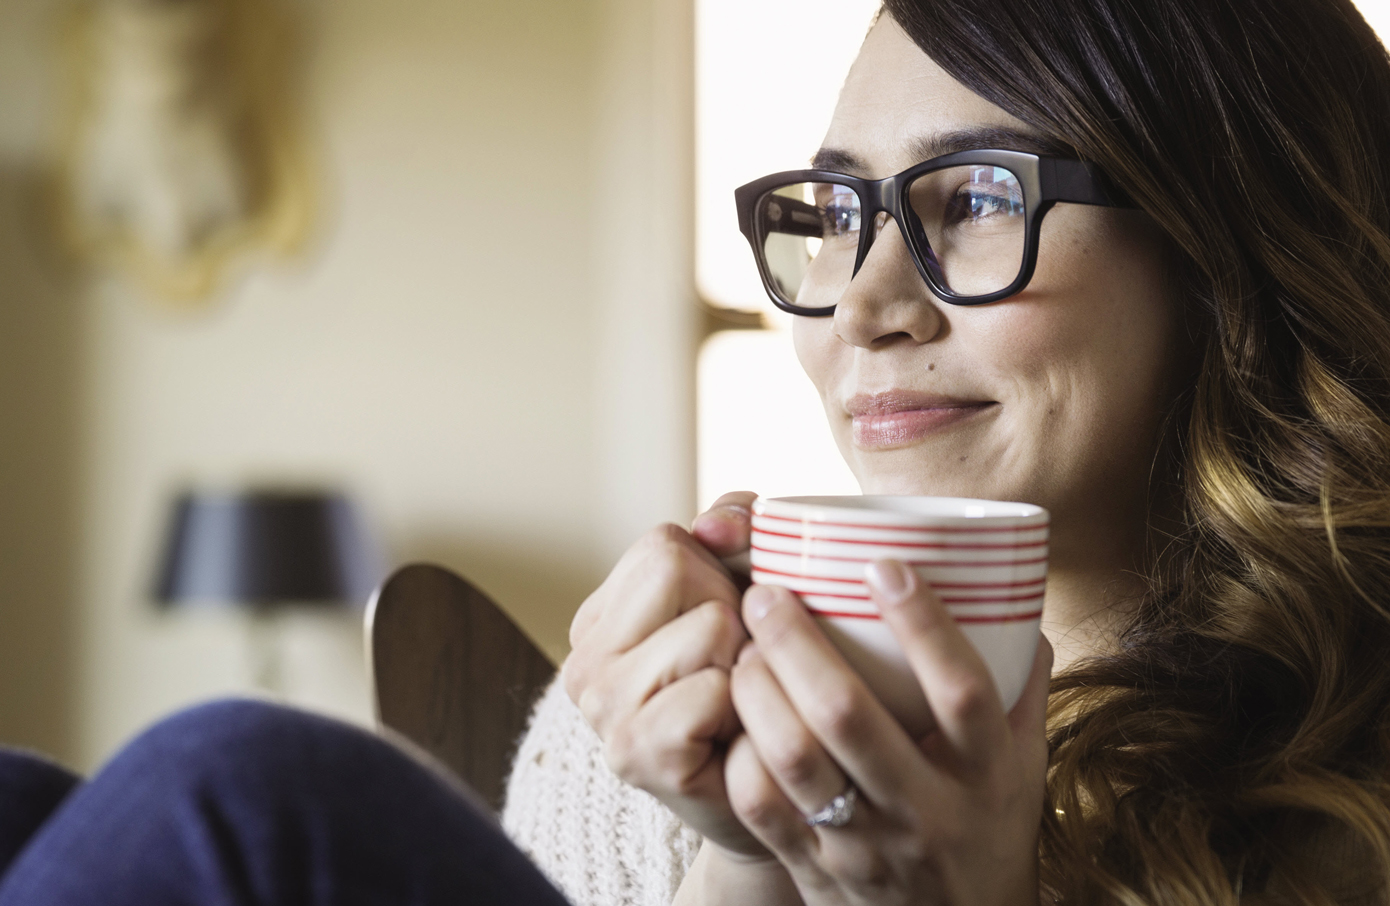 A woman in glasses drinks holds a coffee mug.